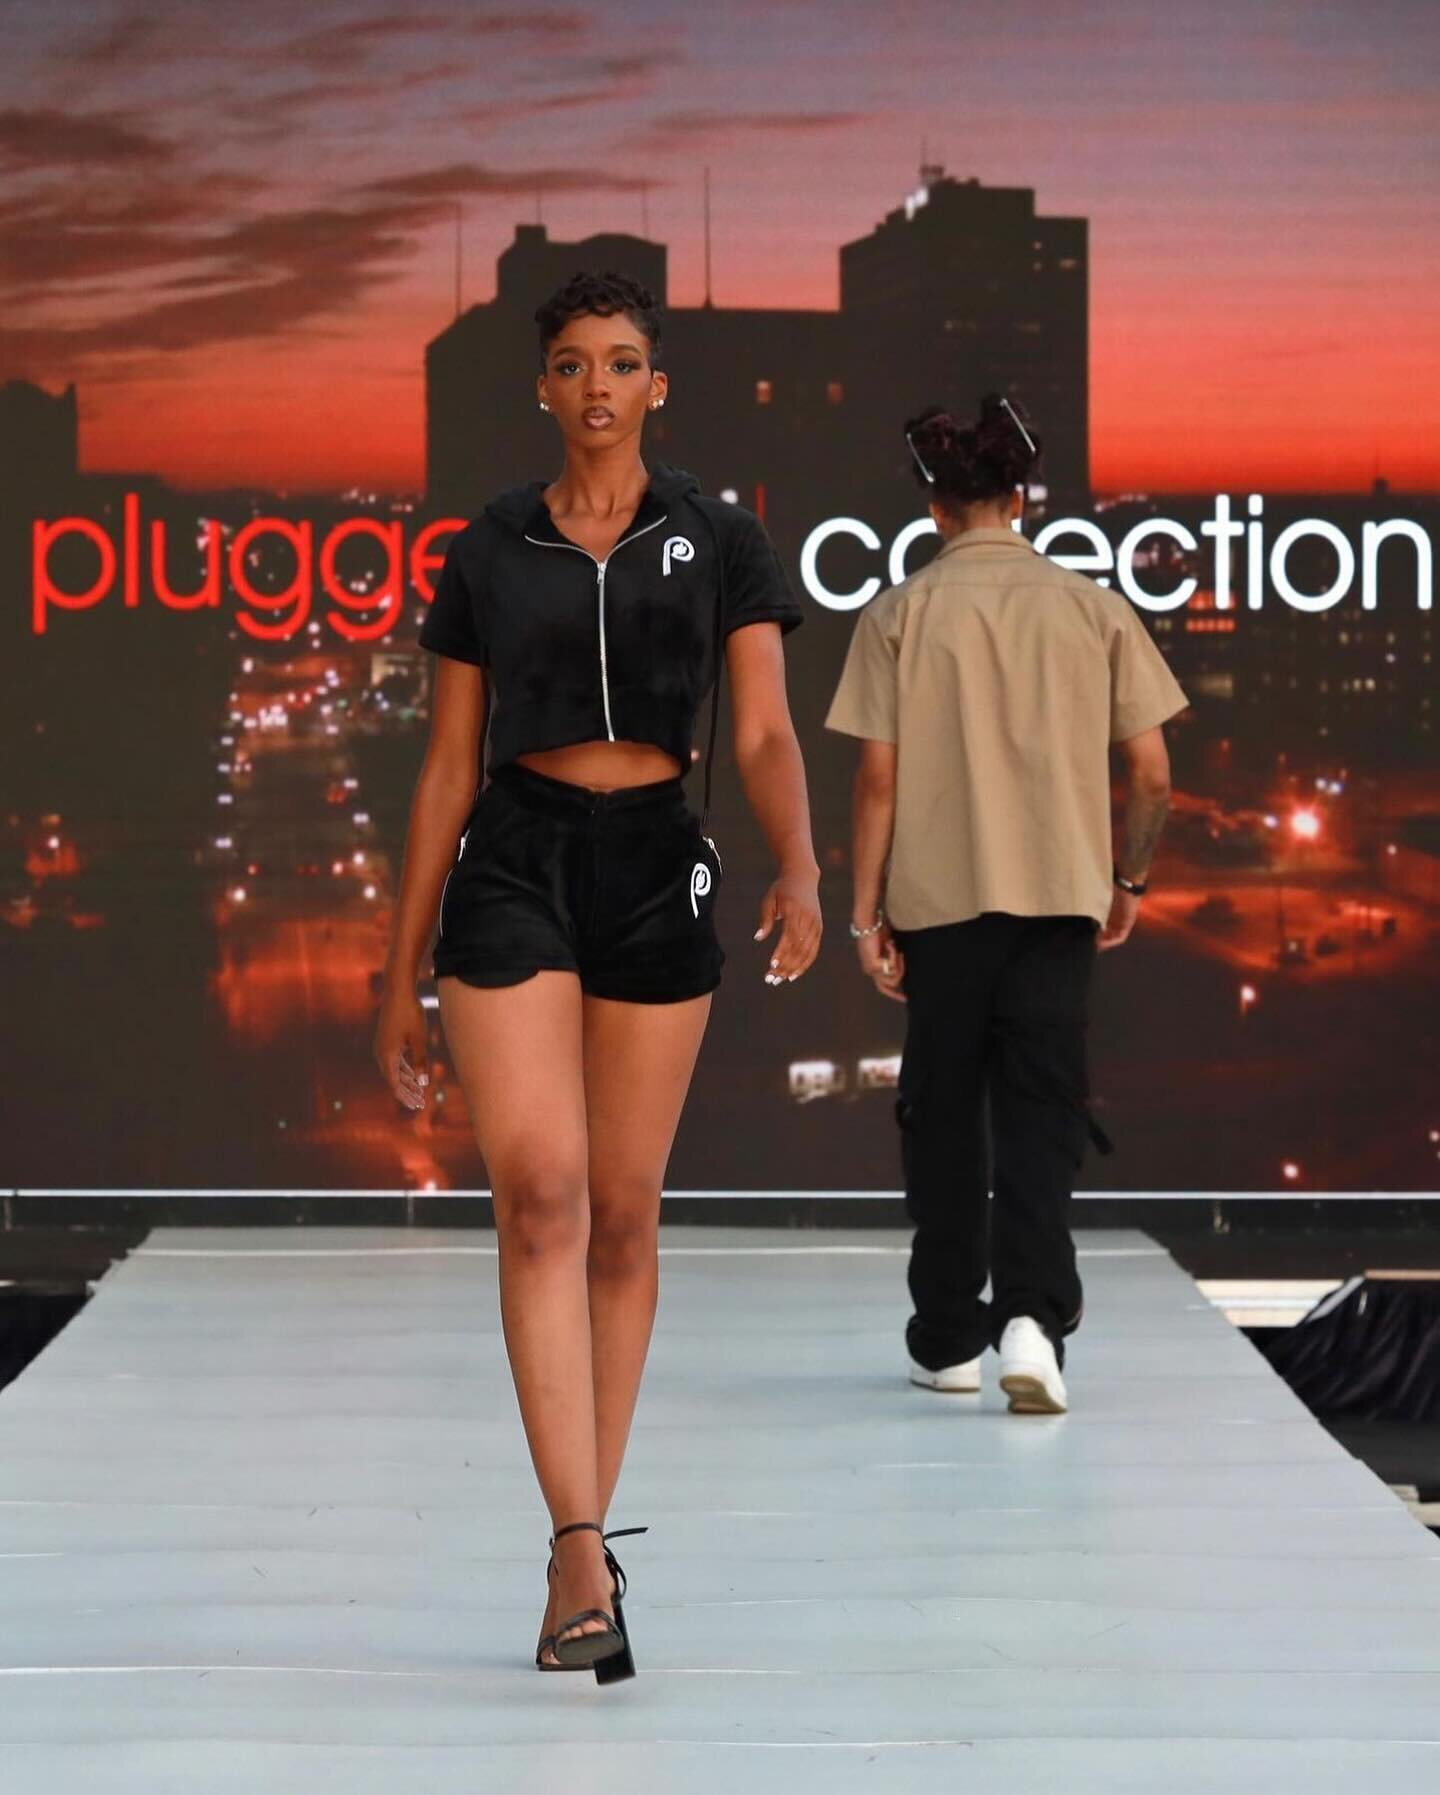 Check out @pluggedincollection at Indie Fashion Show Detroit&hellip;photo by @rt_studios1 

#indiefash #fashion #fashionshow #independentfashion #streetwear #nyfw #fashiondesigner #fashiondesign